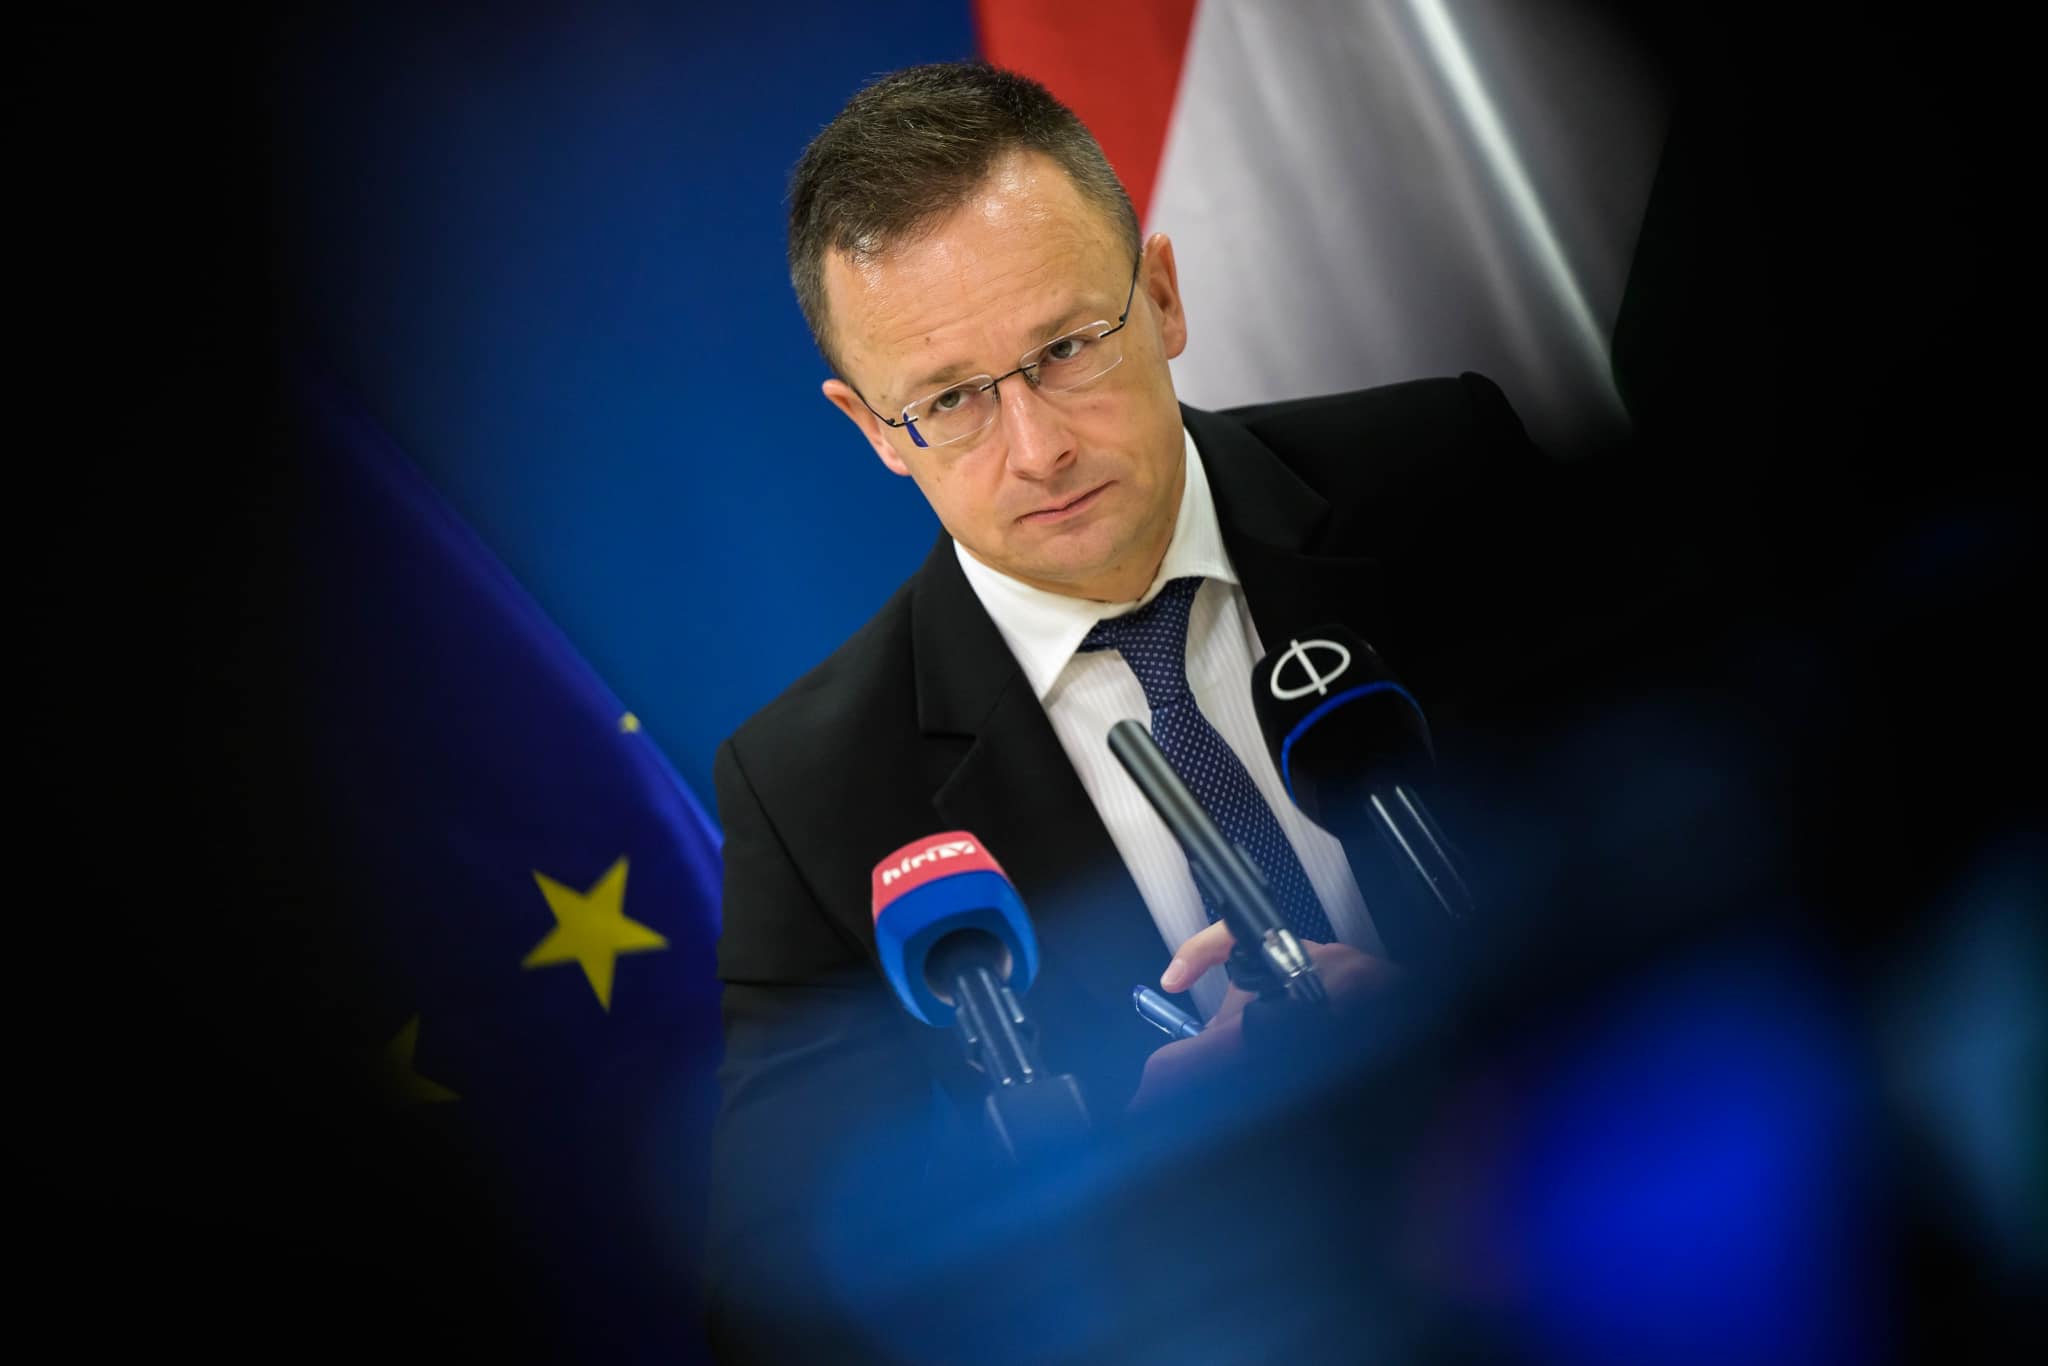 Foreign Minister Warns EU about Acts against Hungarians in Ukraine